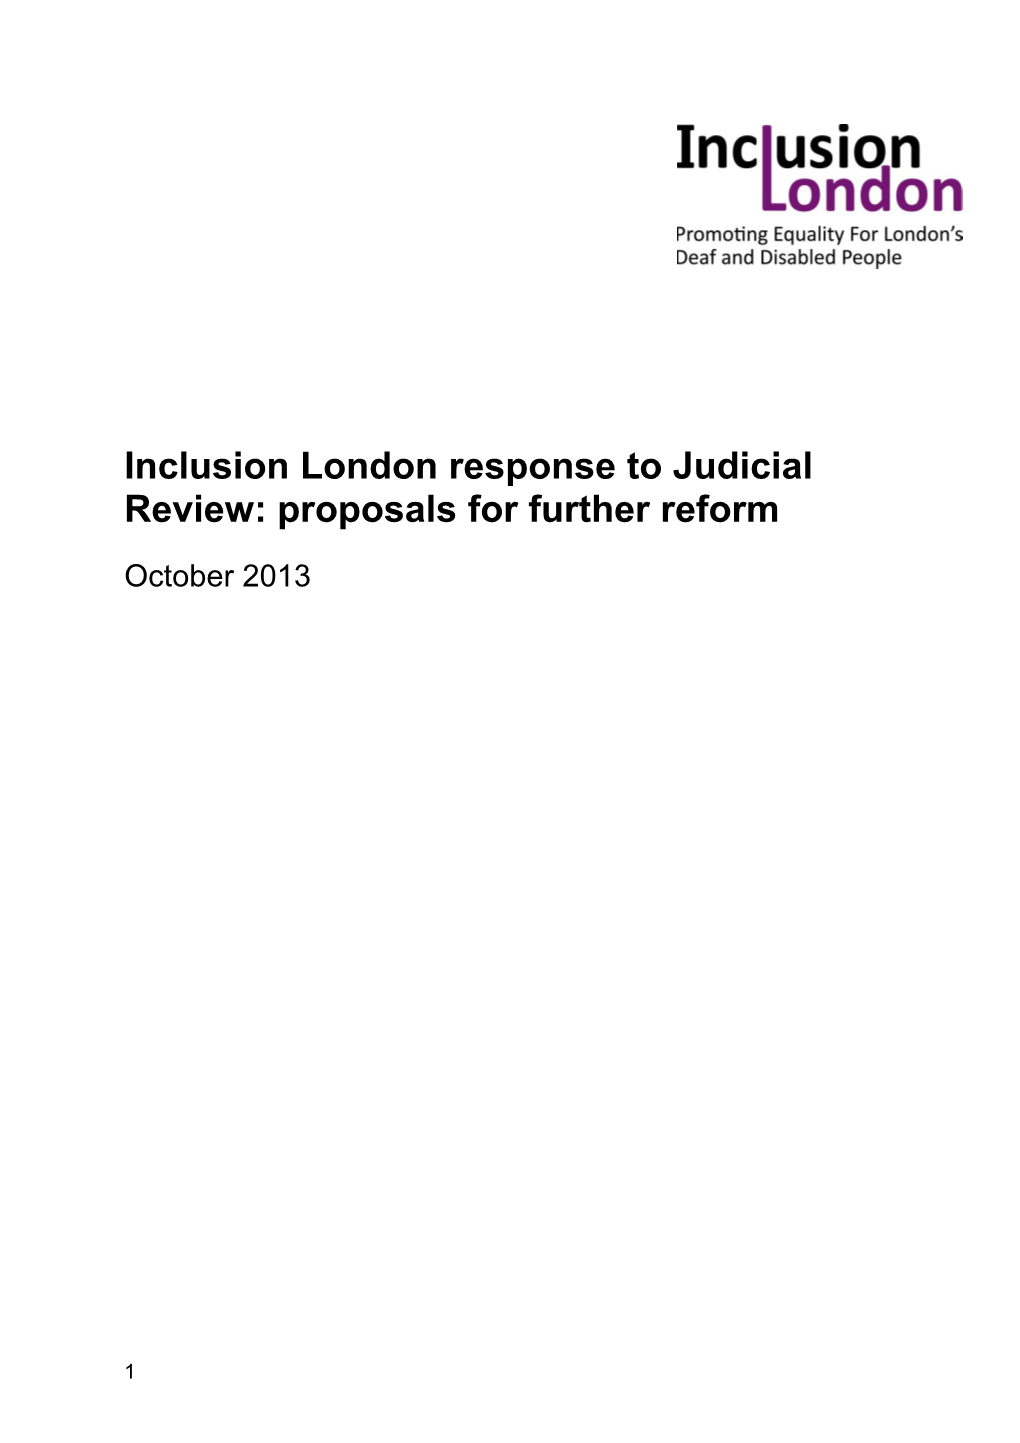 Inclusion London Response to Judicial Review: Proposals for Further Reform